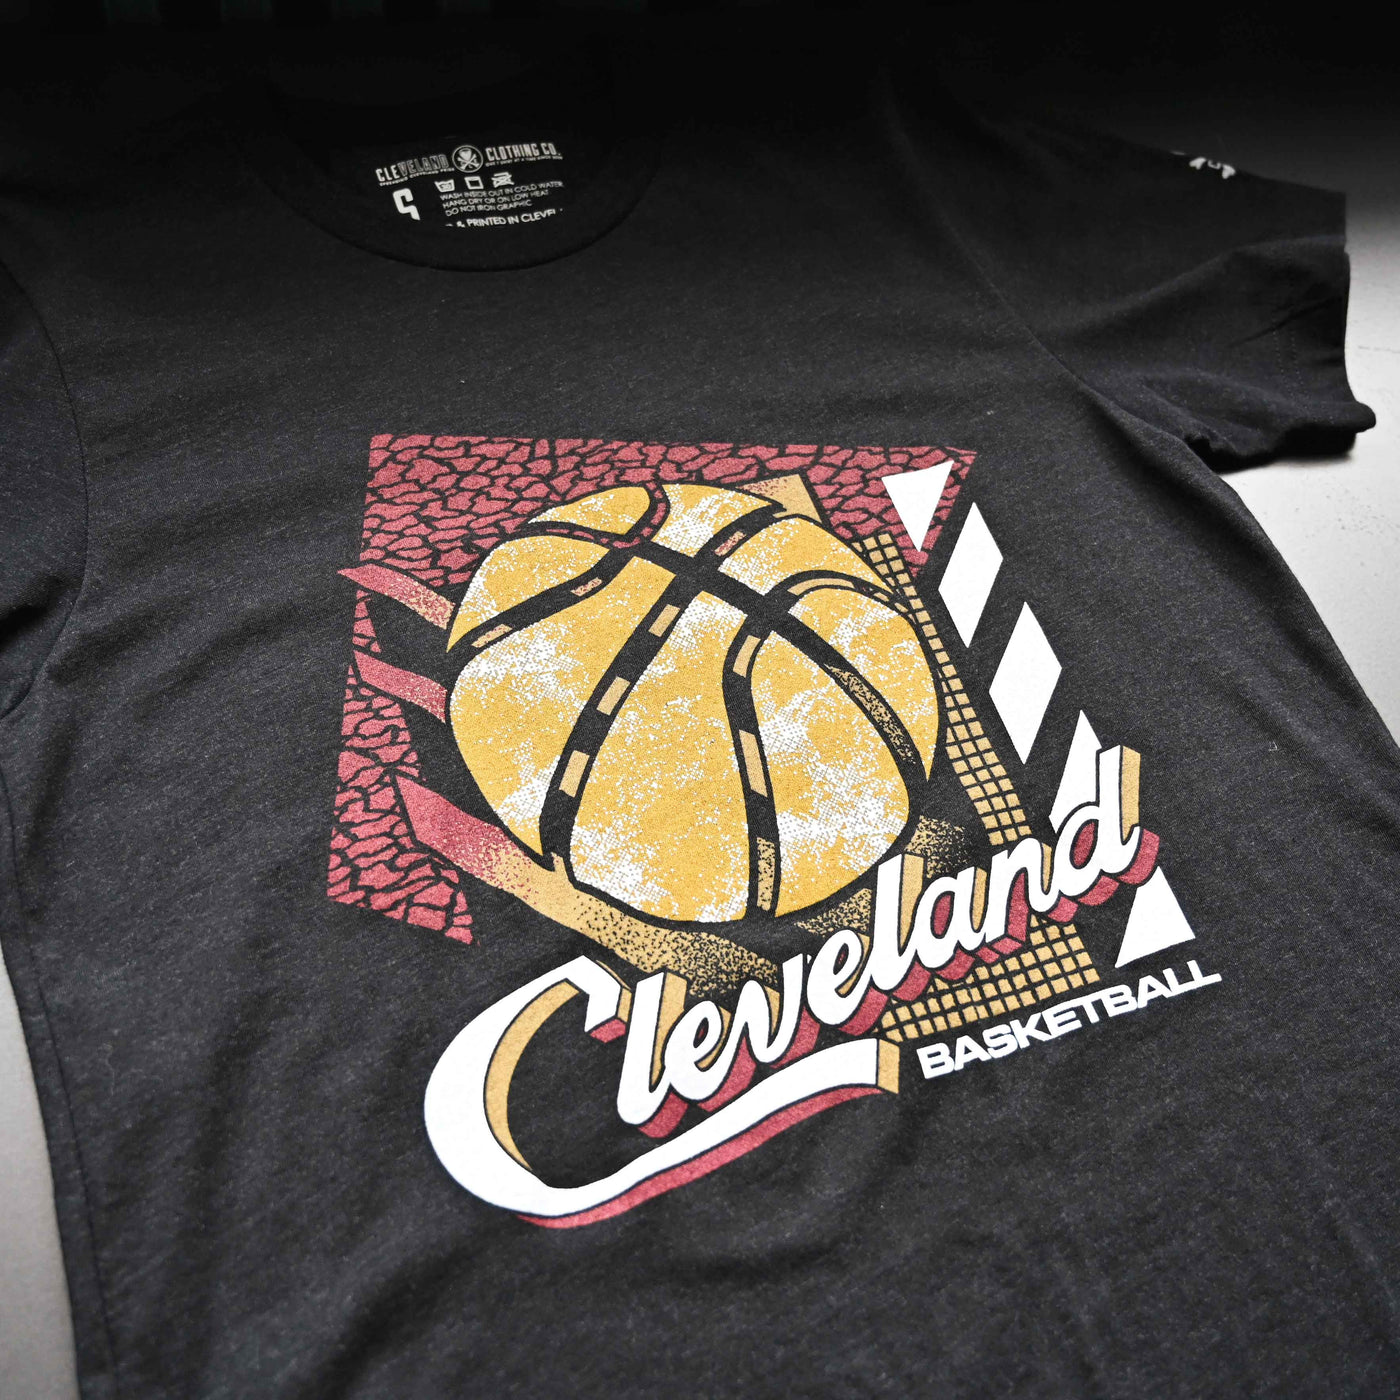 NBA Washed Short Cleveland Cavaliers- Basketball Store